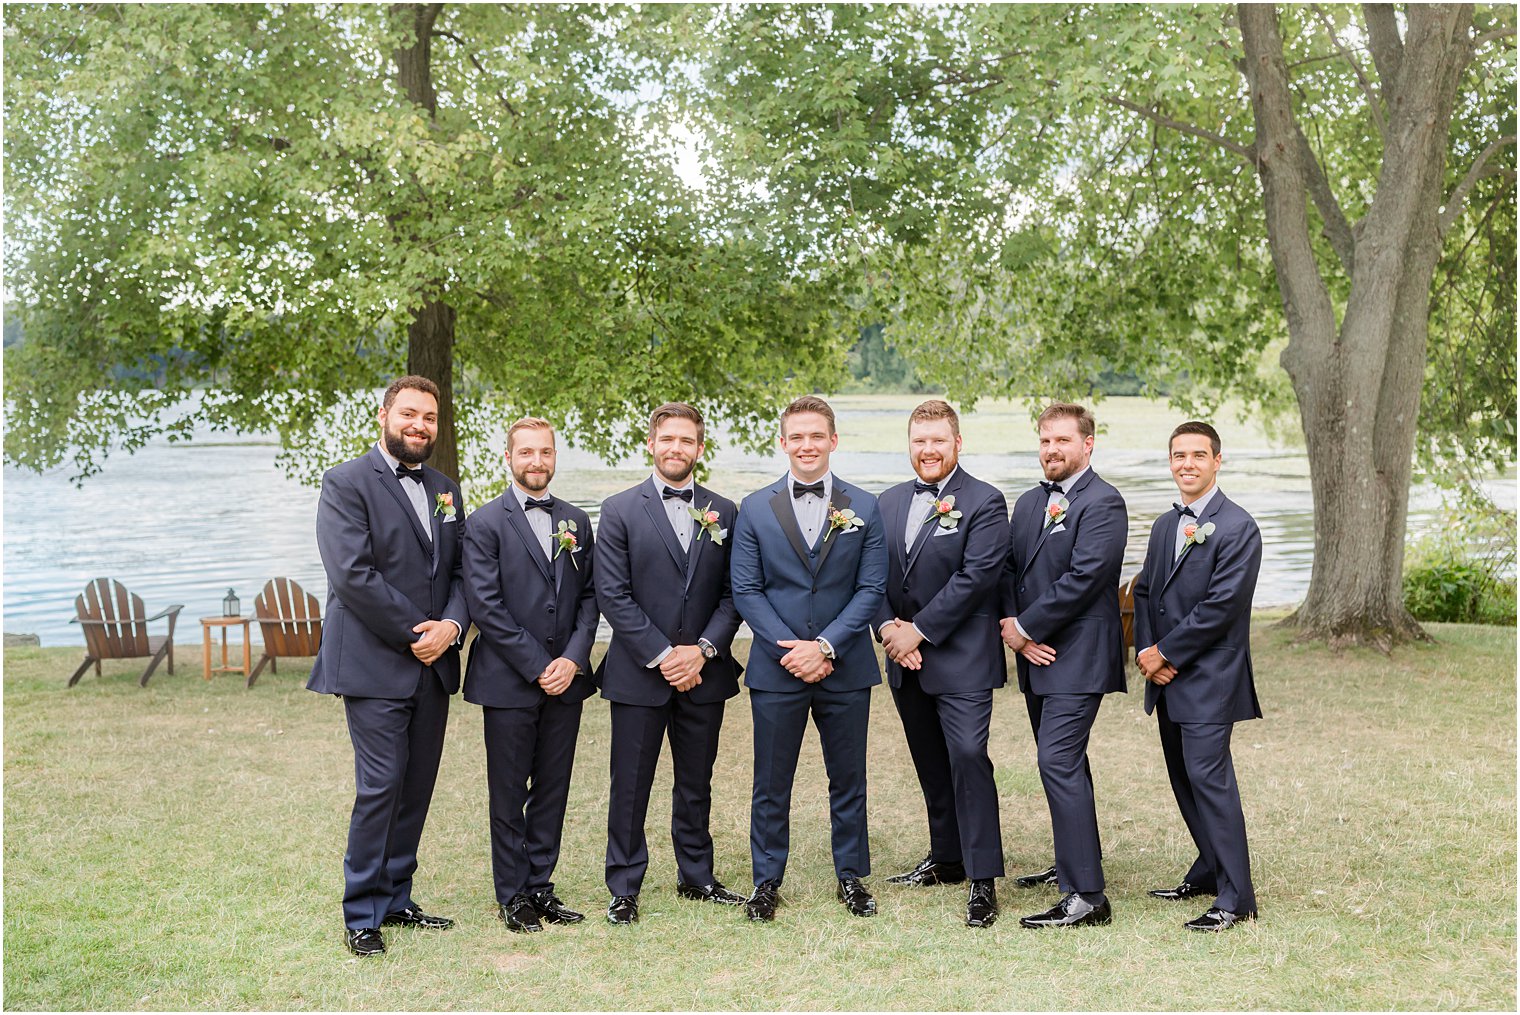 groom poses with groomsmen in navy suits at Indian Trail Club